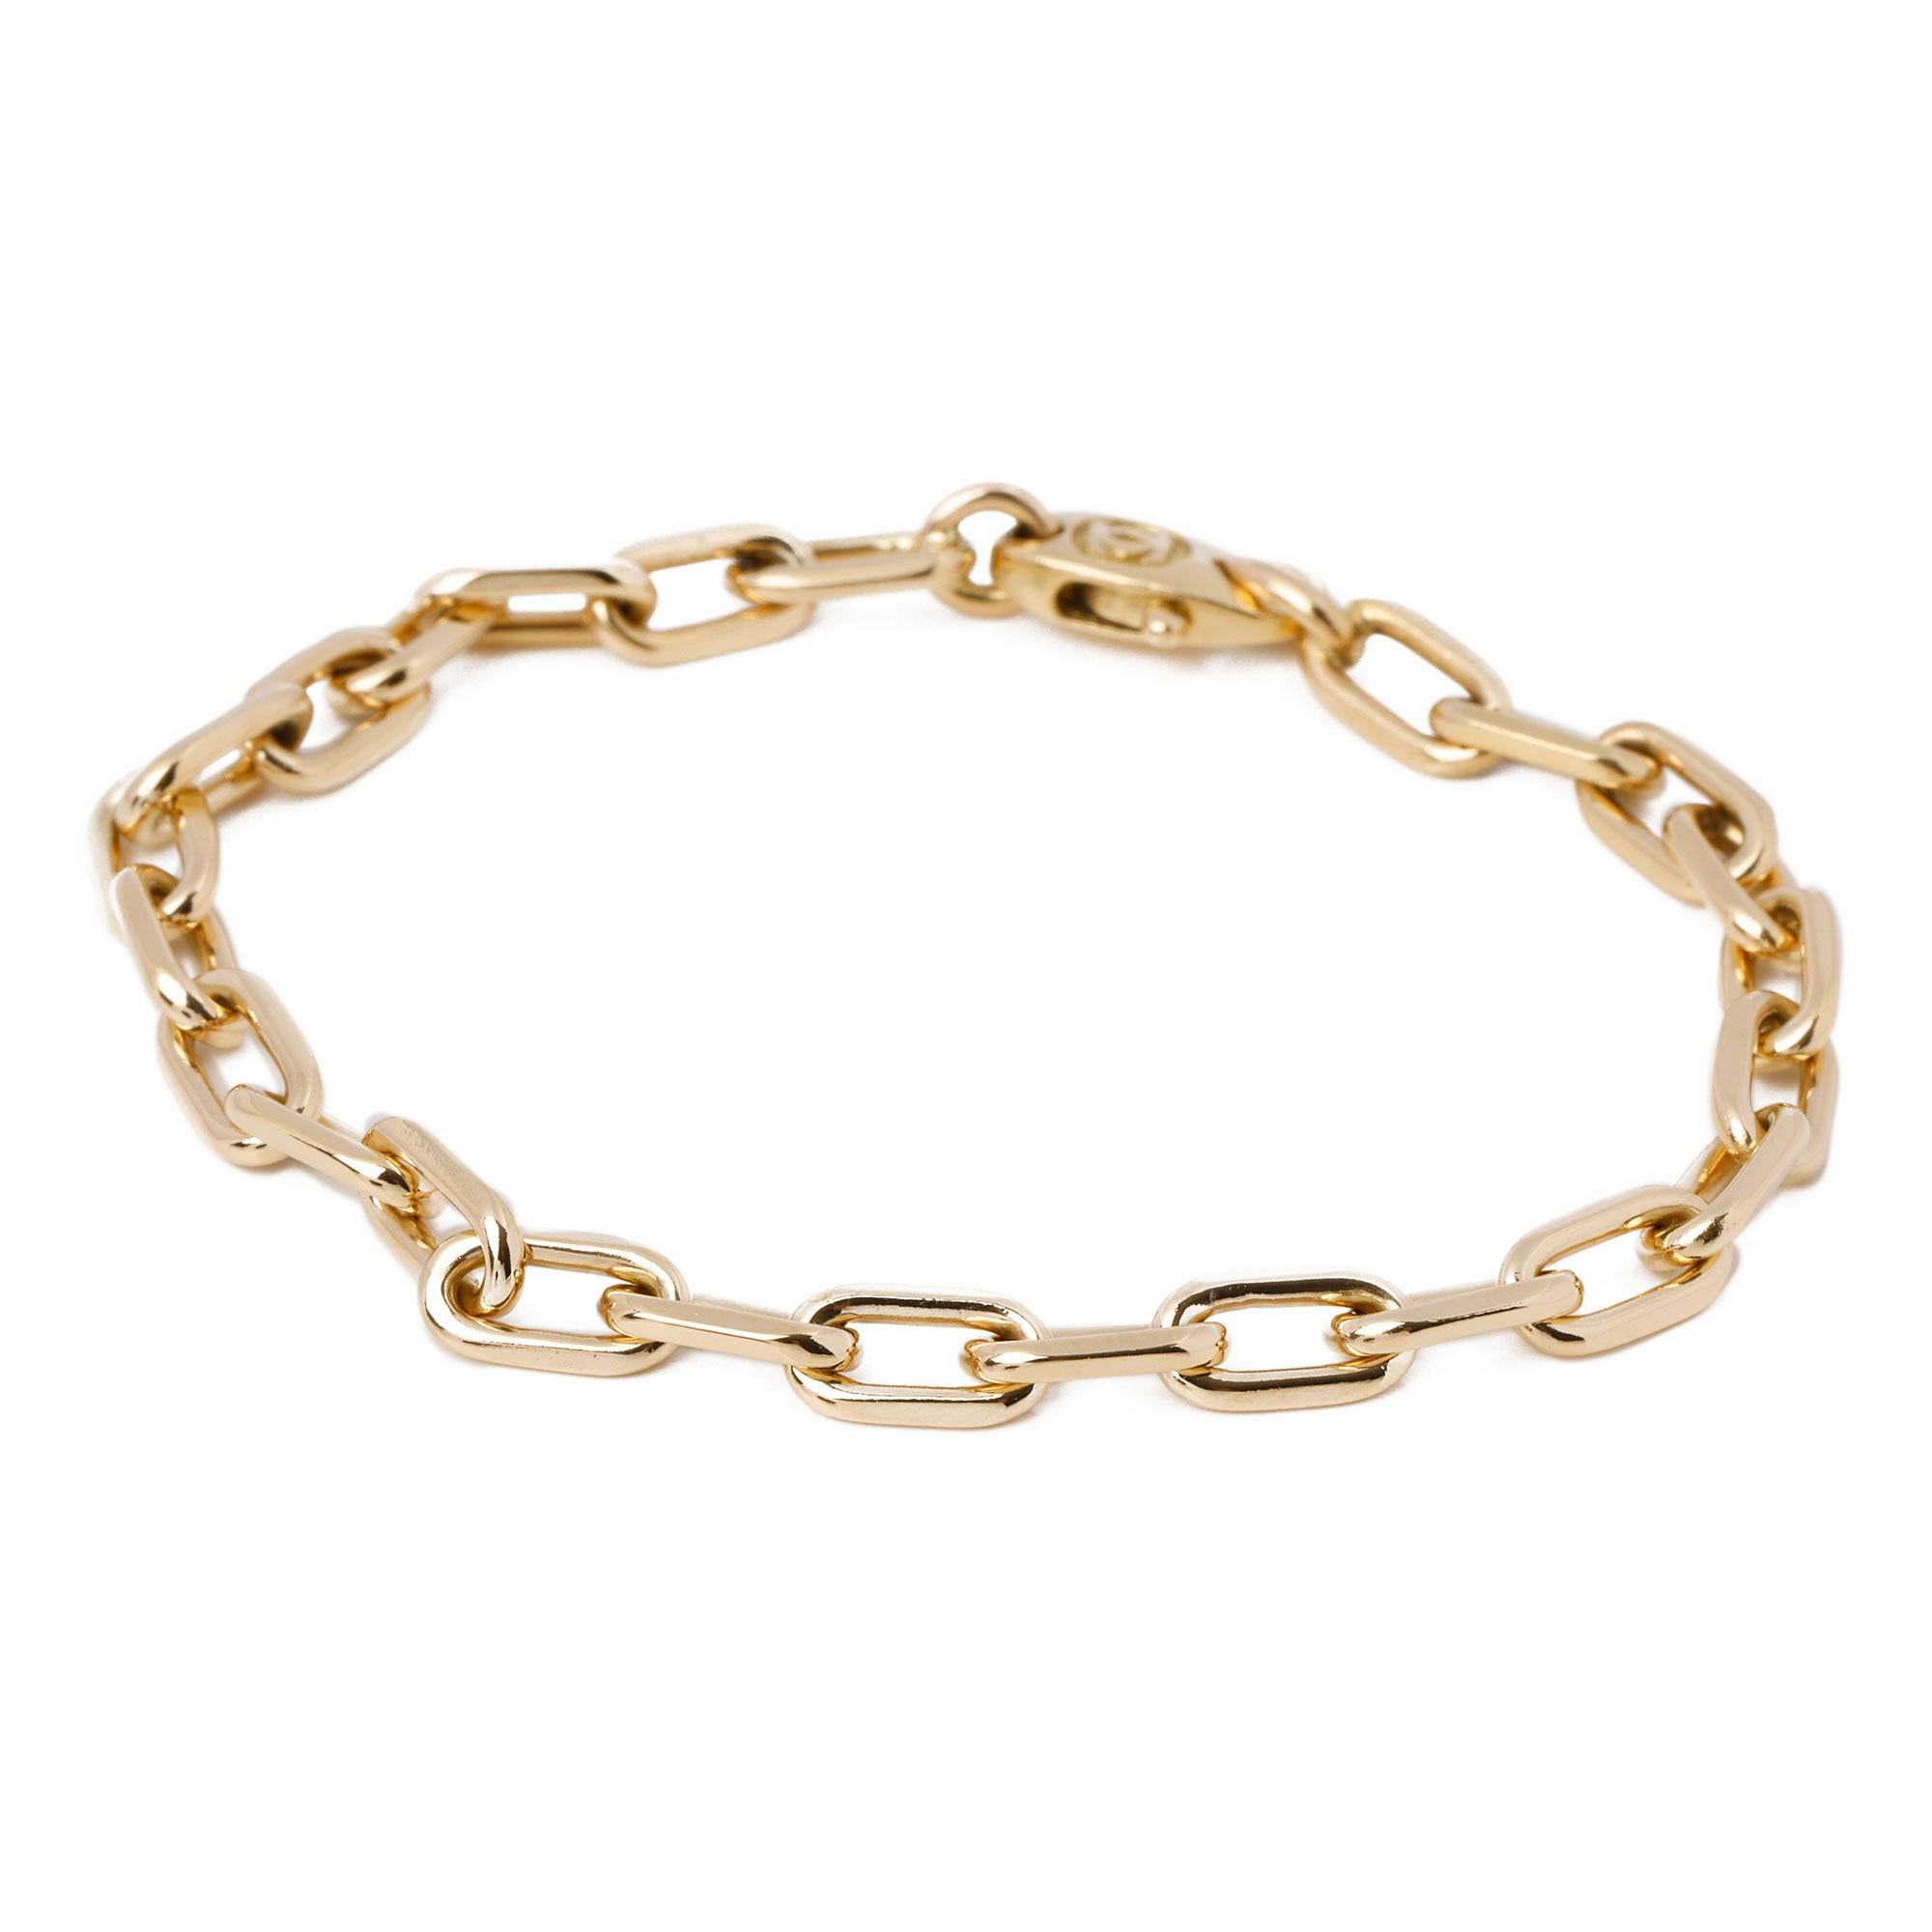 This bracelet by Cartier is from their Santos collection and features open oval links in 18ct yellow gold. It is accompanied by it's Cartier box. Our Xupes reference is COMJ601 should you need to quote this. 